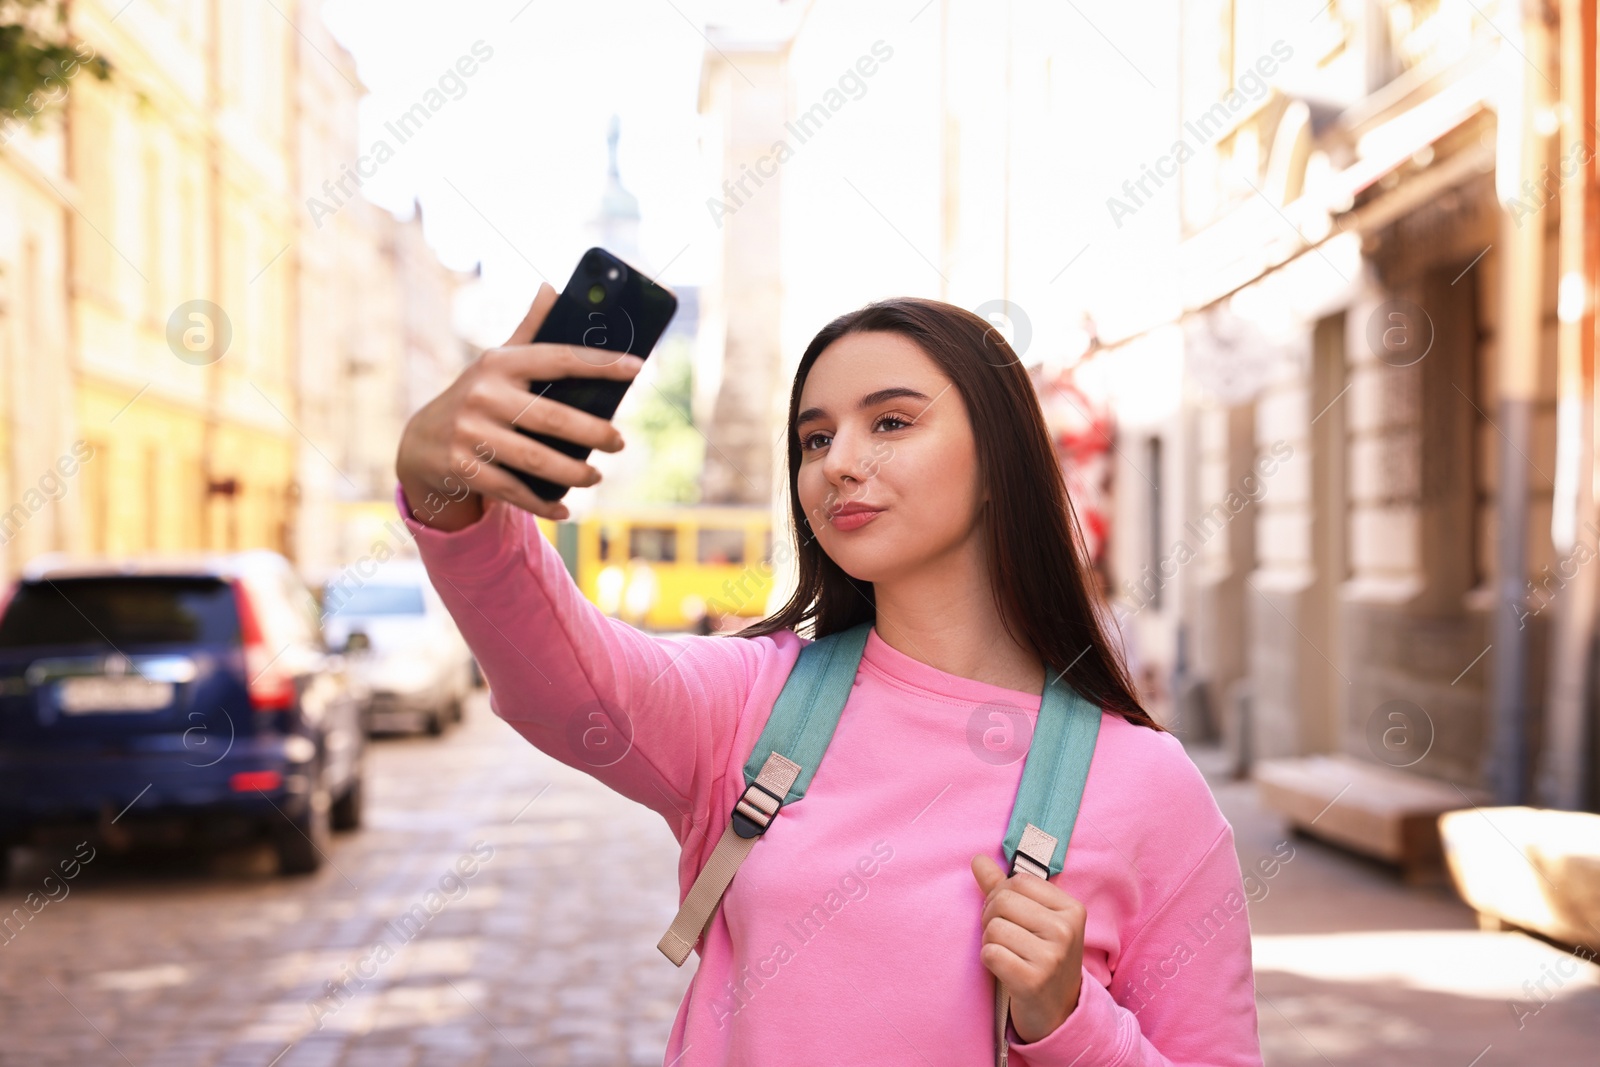 Photo of Travel blogger takIng selfie with smartphone on city street